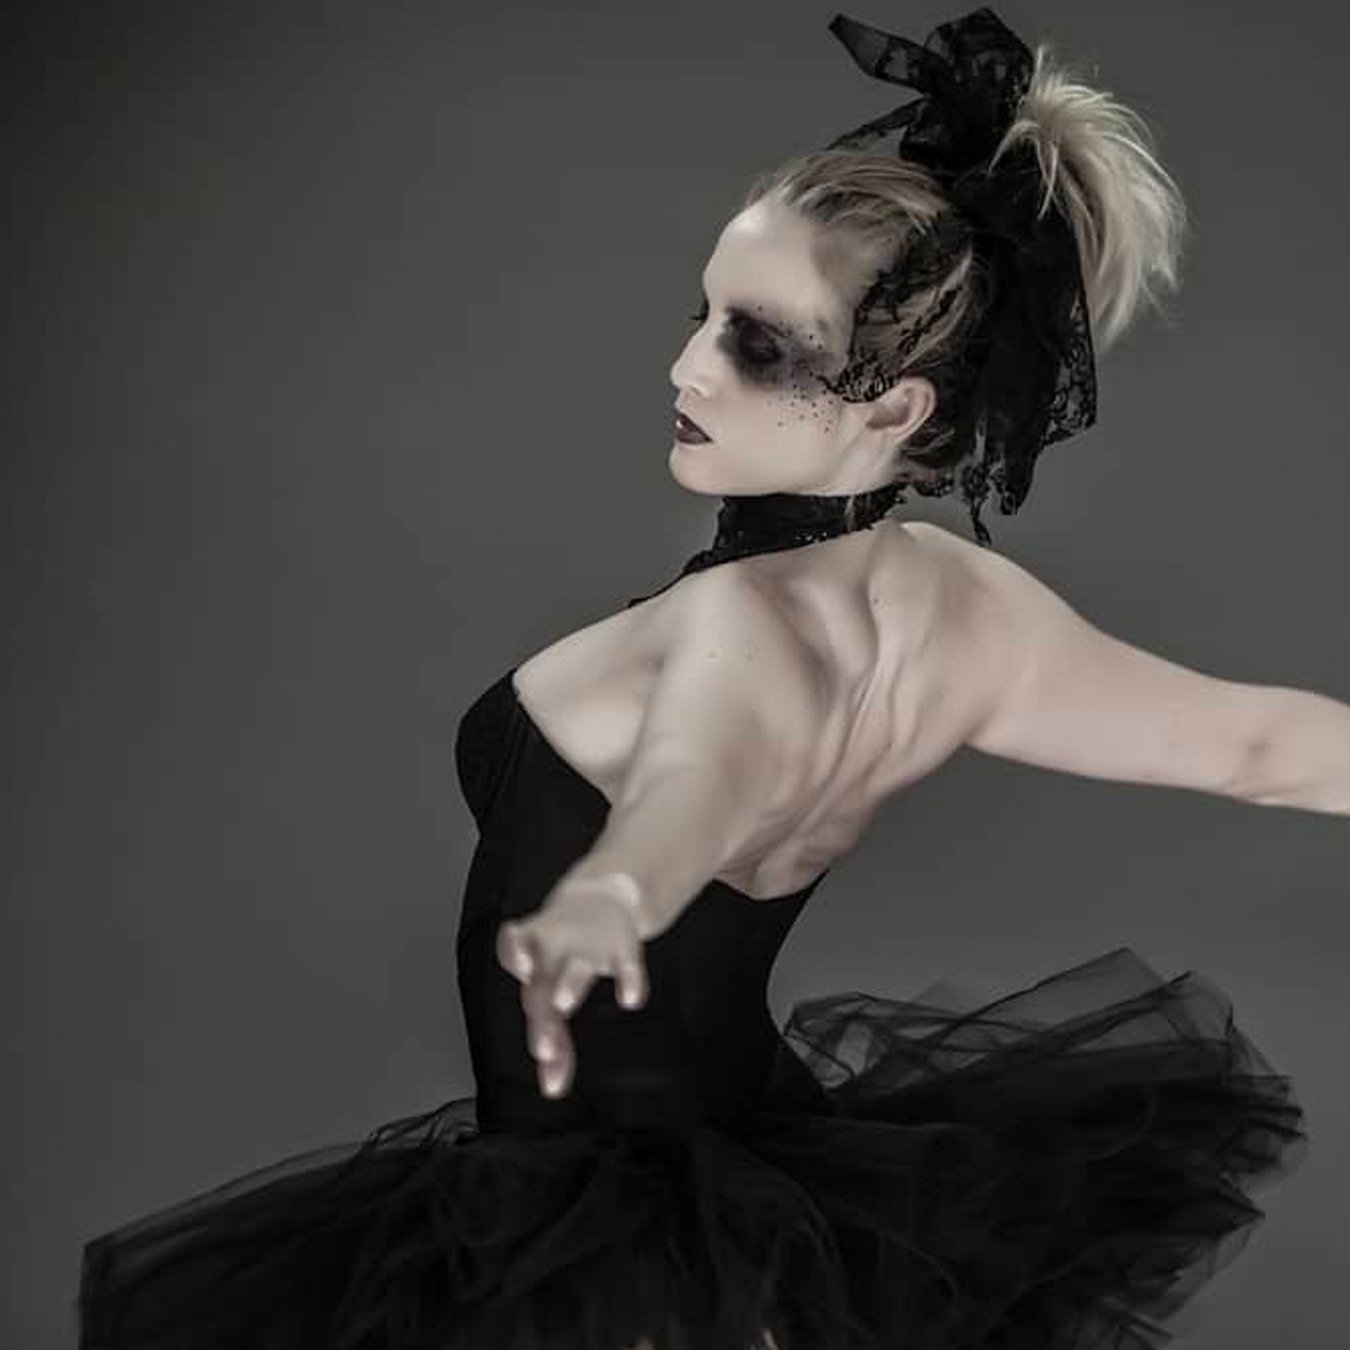 Ballerina with arms spread dancing back to the camera, wearing a black tutu skirt